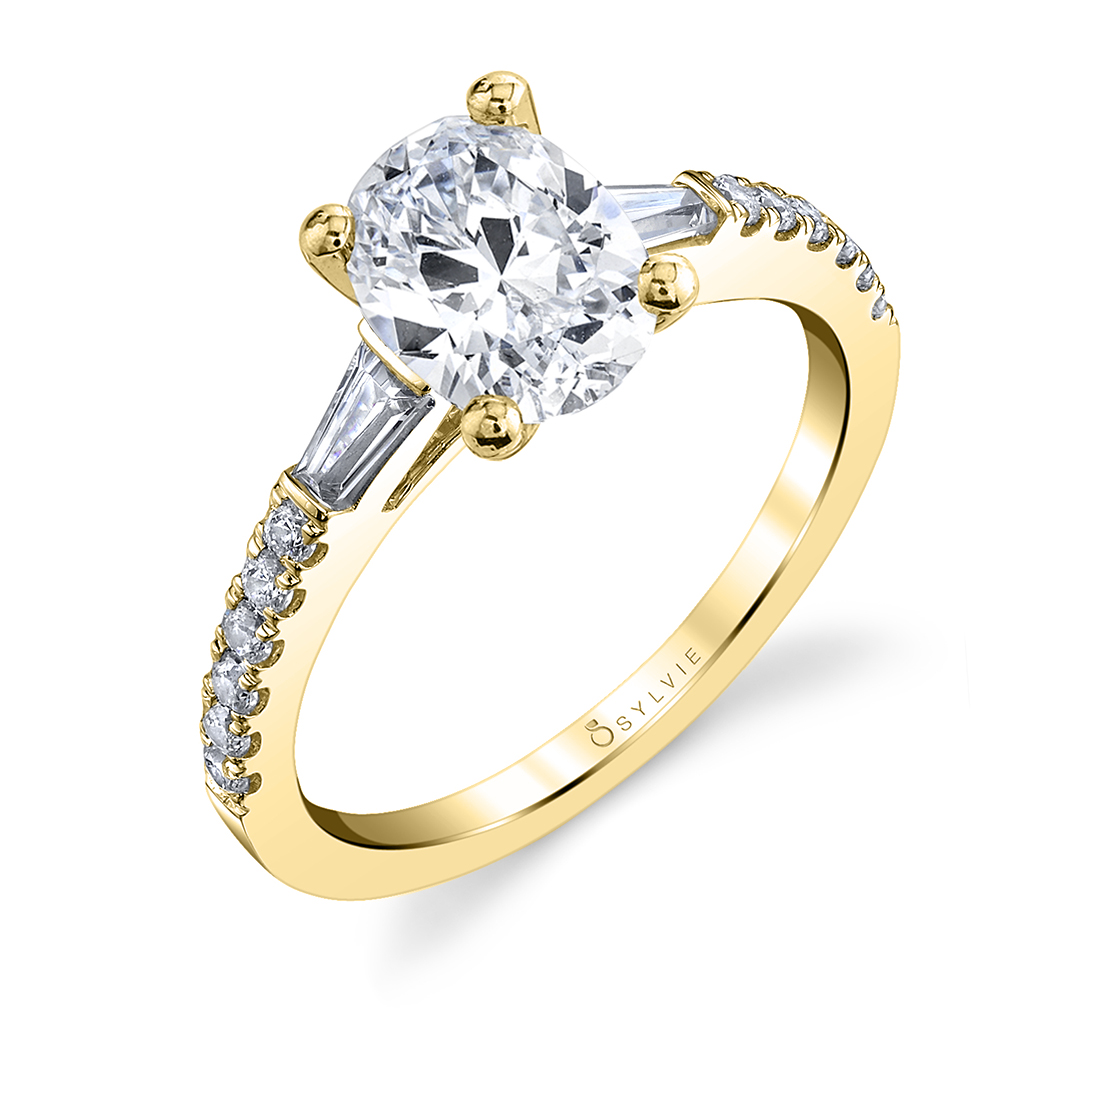 Oval engagement ring with baguettes shown in yellow gold